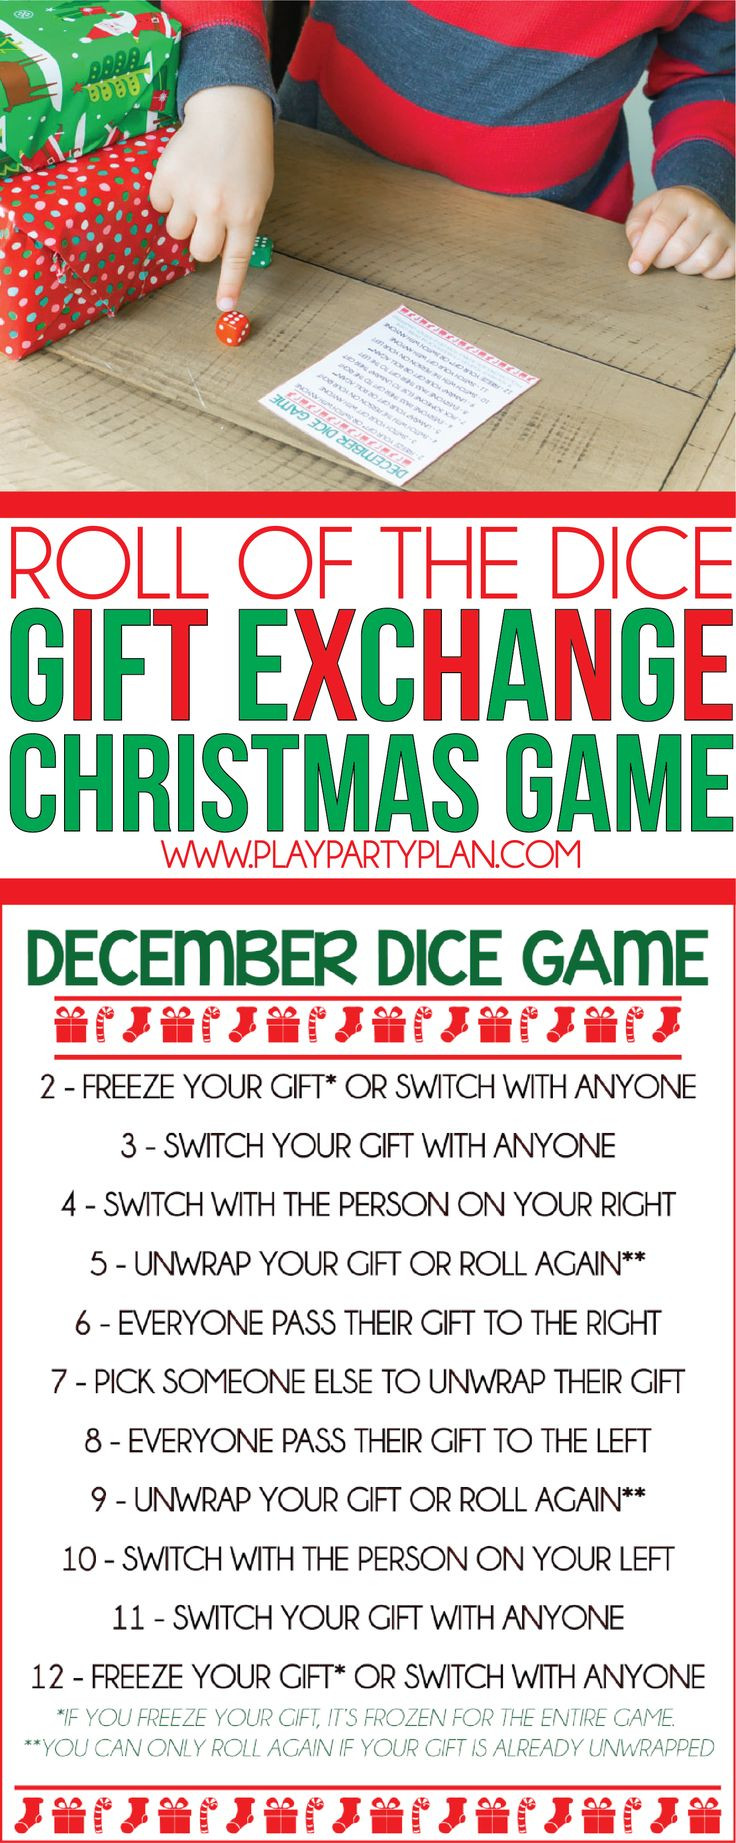 Office Christmas Party Gift Exchange Ideas
 25 unique Gift exchange games ideas on Pinterest